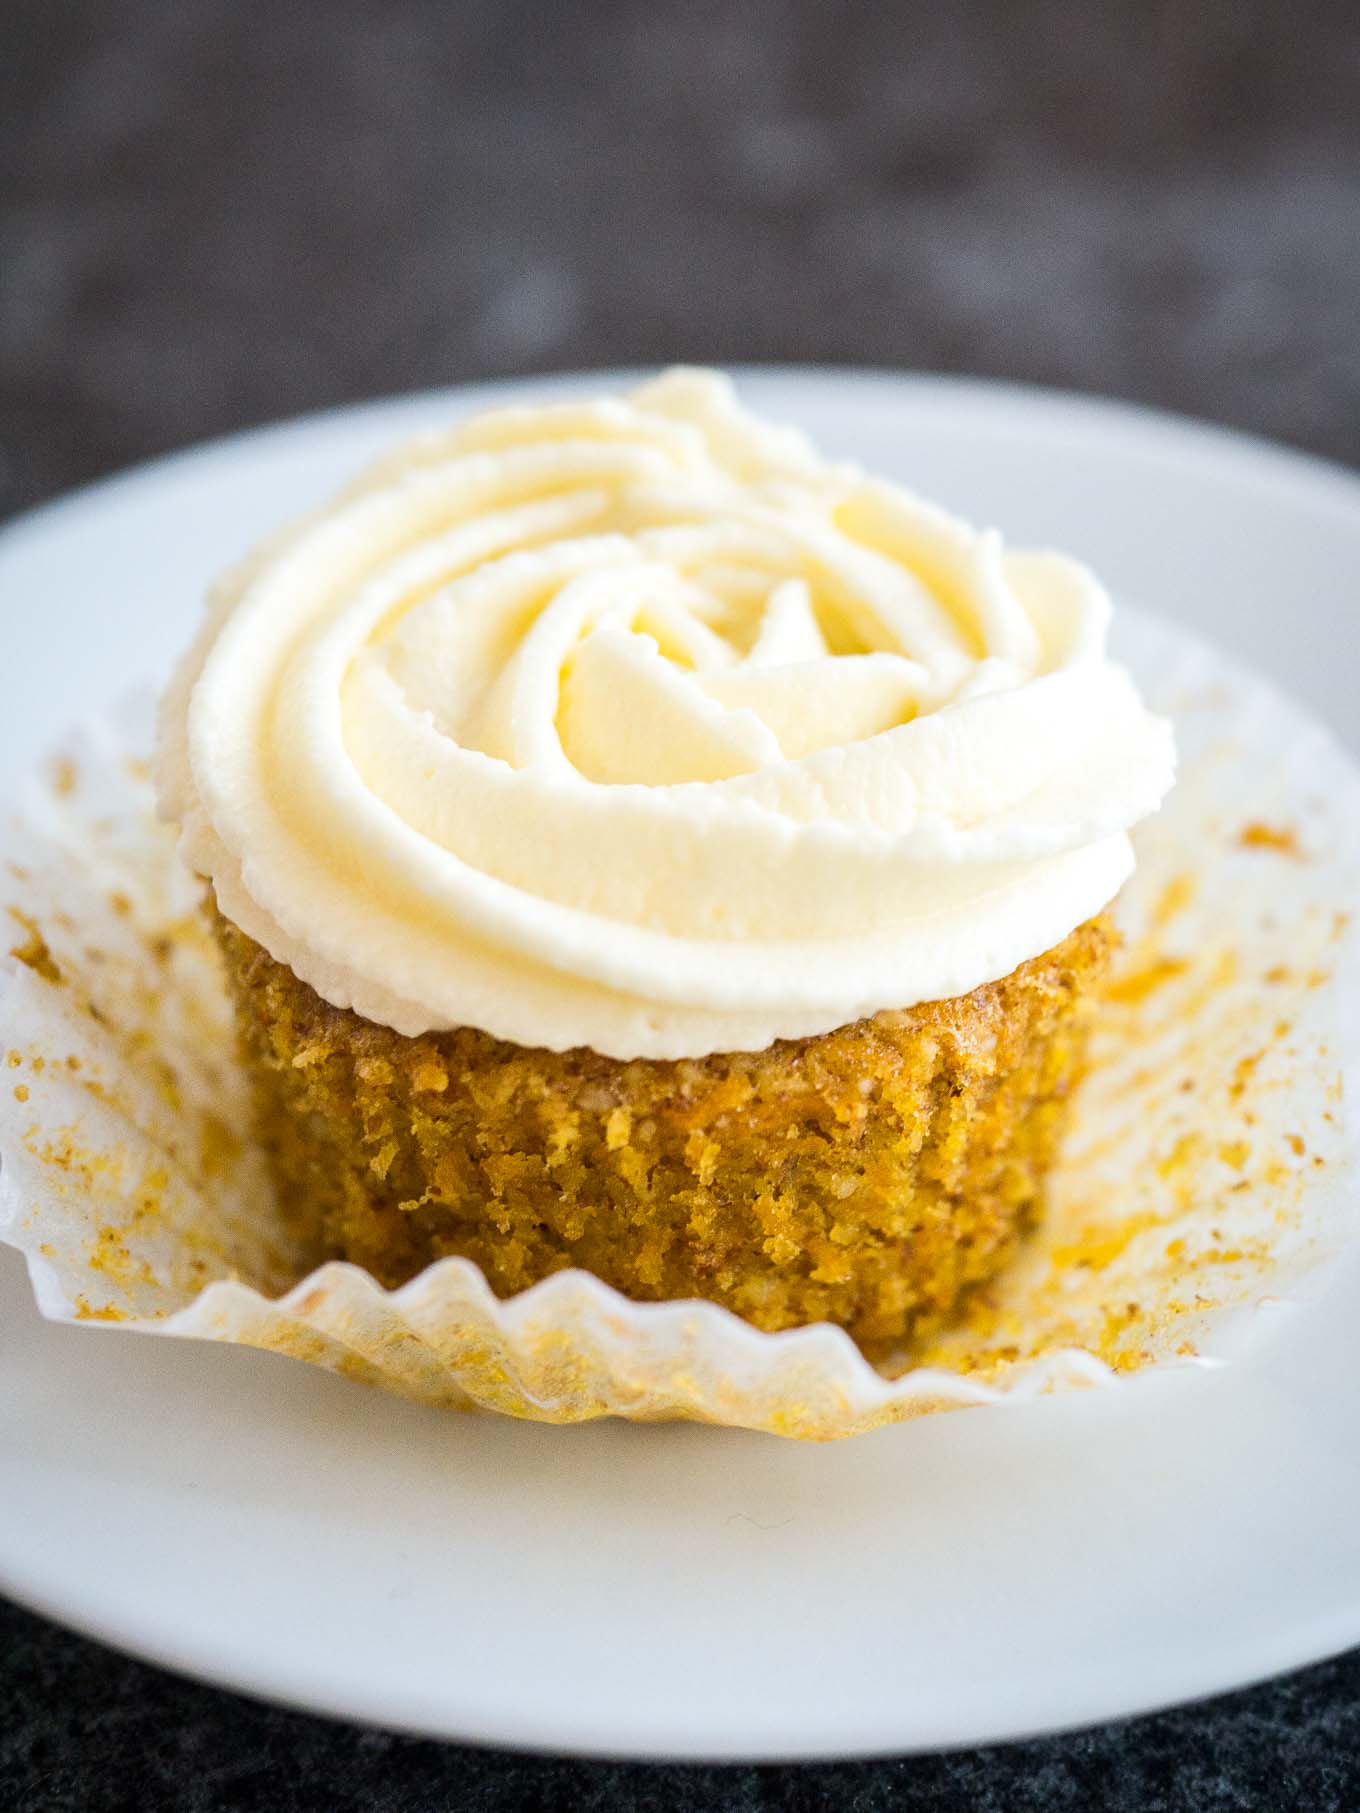 A carrot cake cupcake with cream cheese frosting on top. The paper is folded away from the cupcake and it's sitting on a white plate.